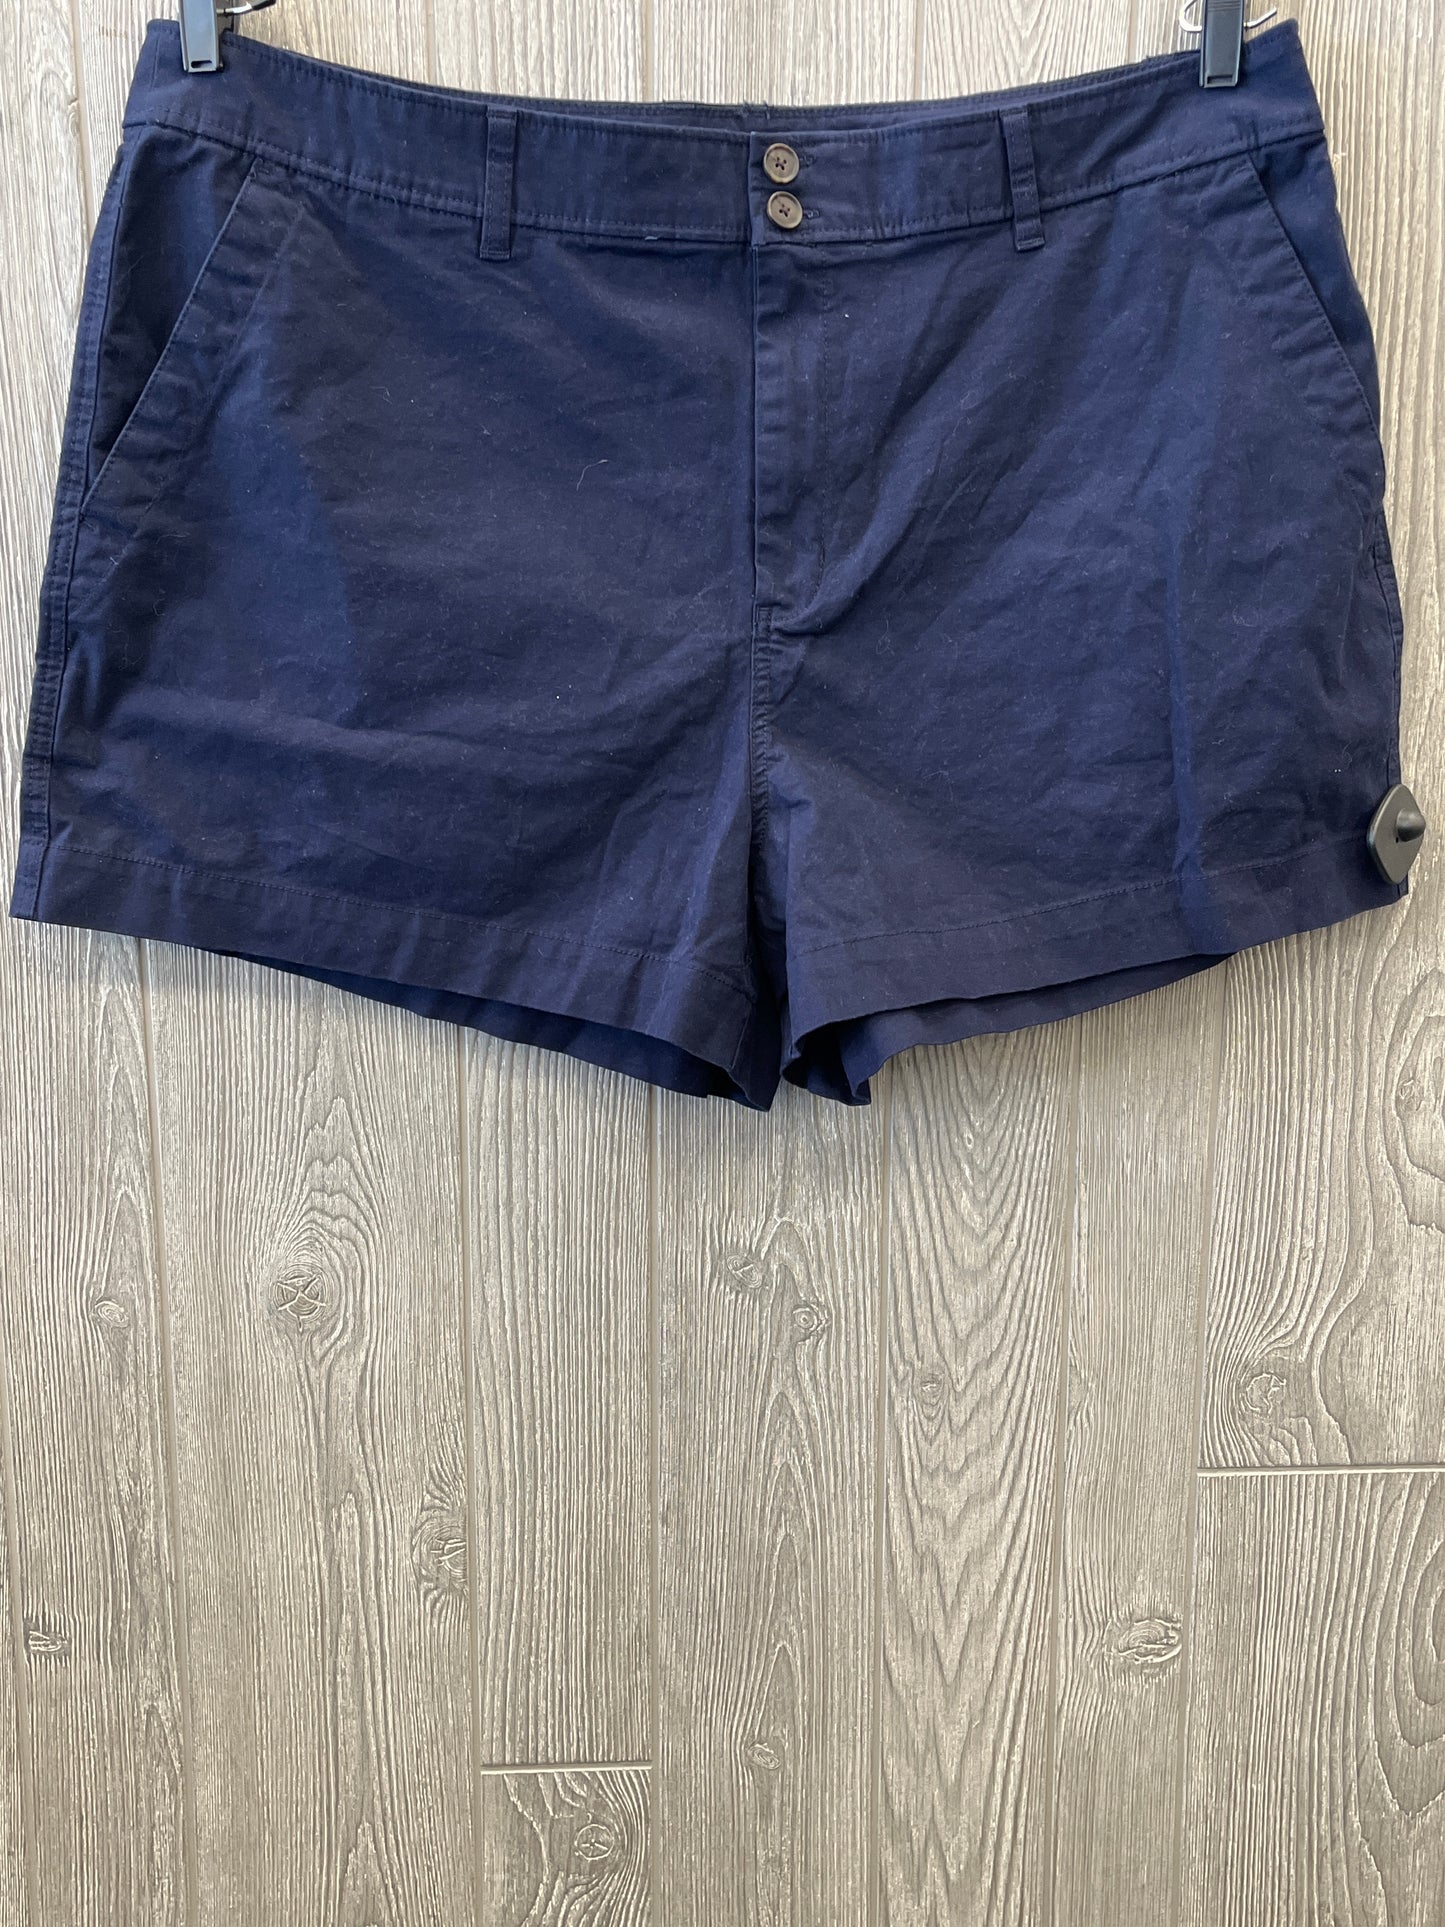 Shorts By A New Day  Size: 22